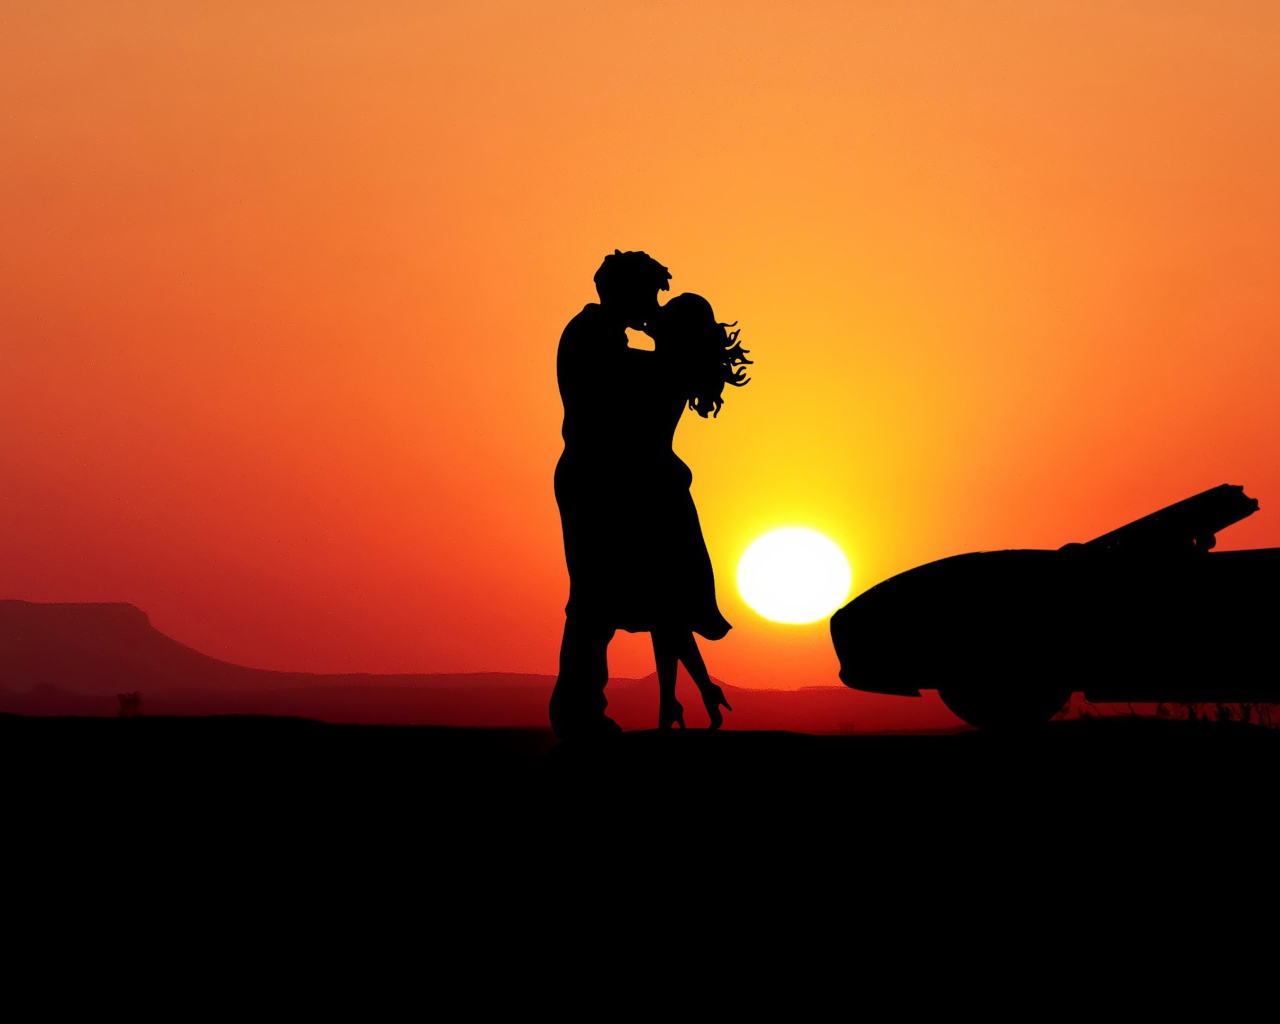 Kissing couple on sunset background with a car